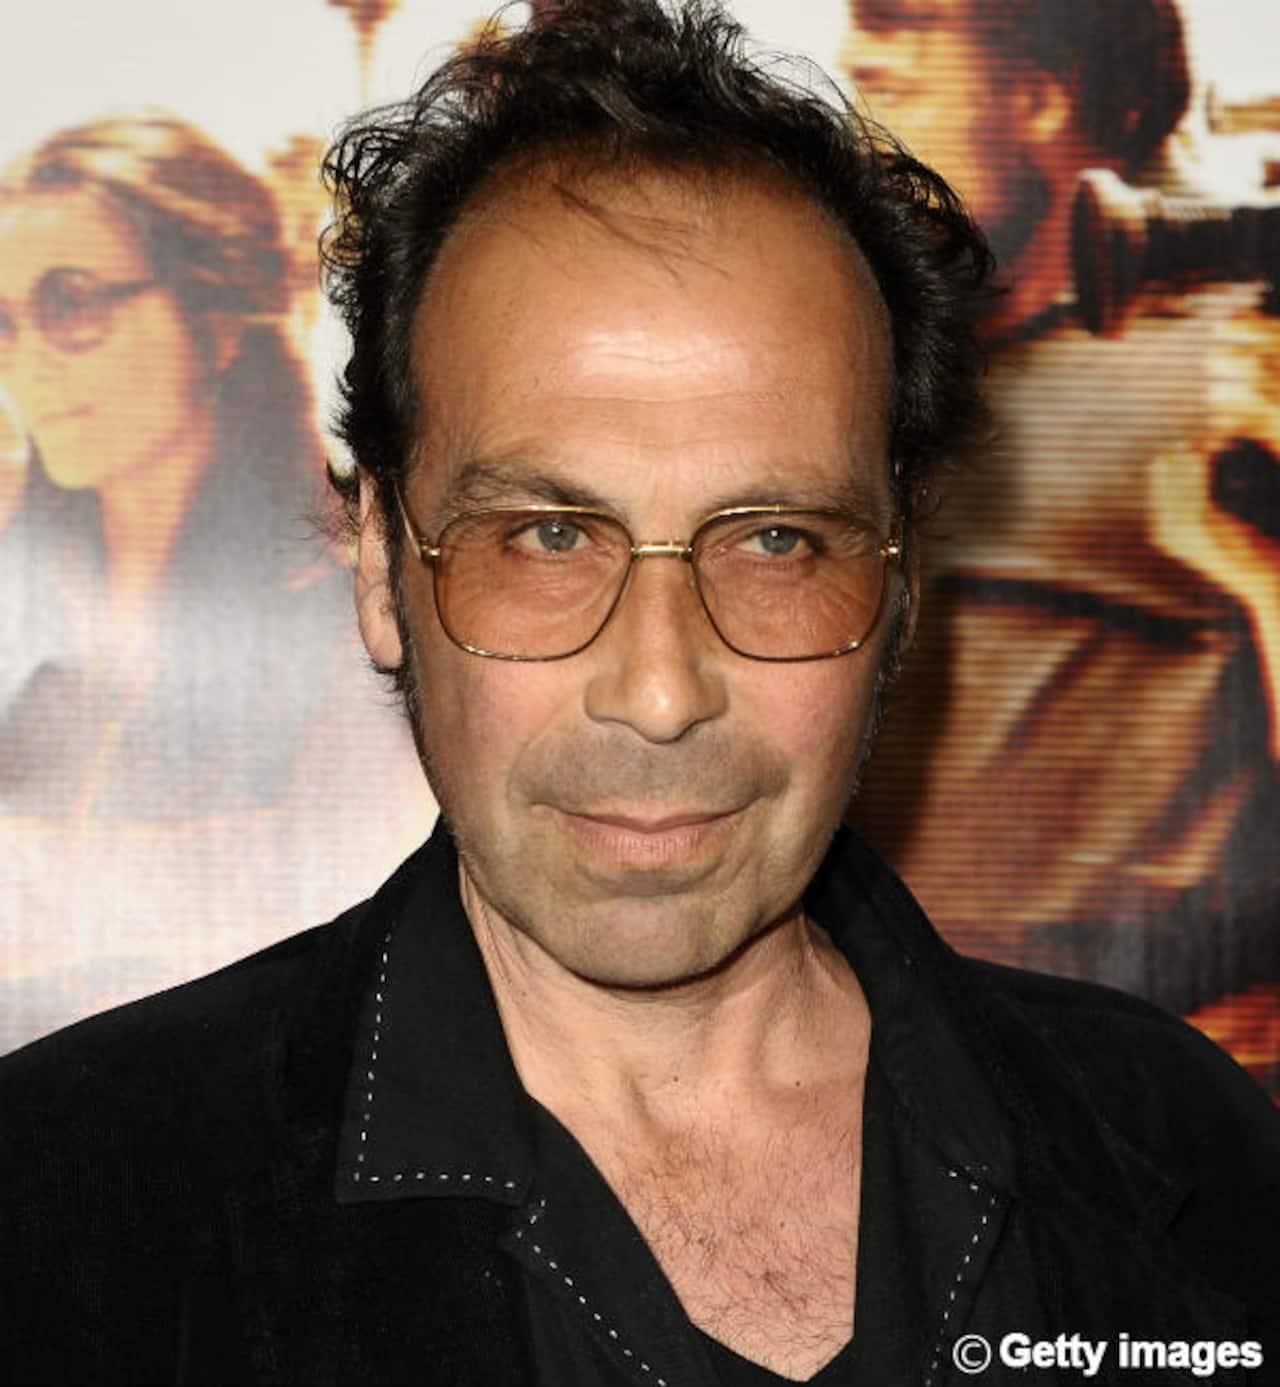 Actor-comedian Taylor Negron passed away